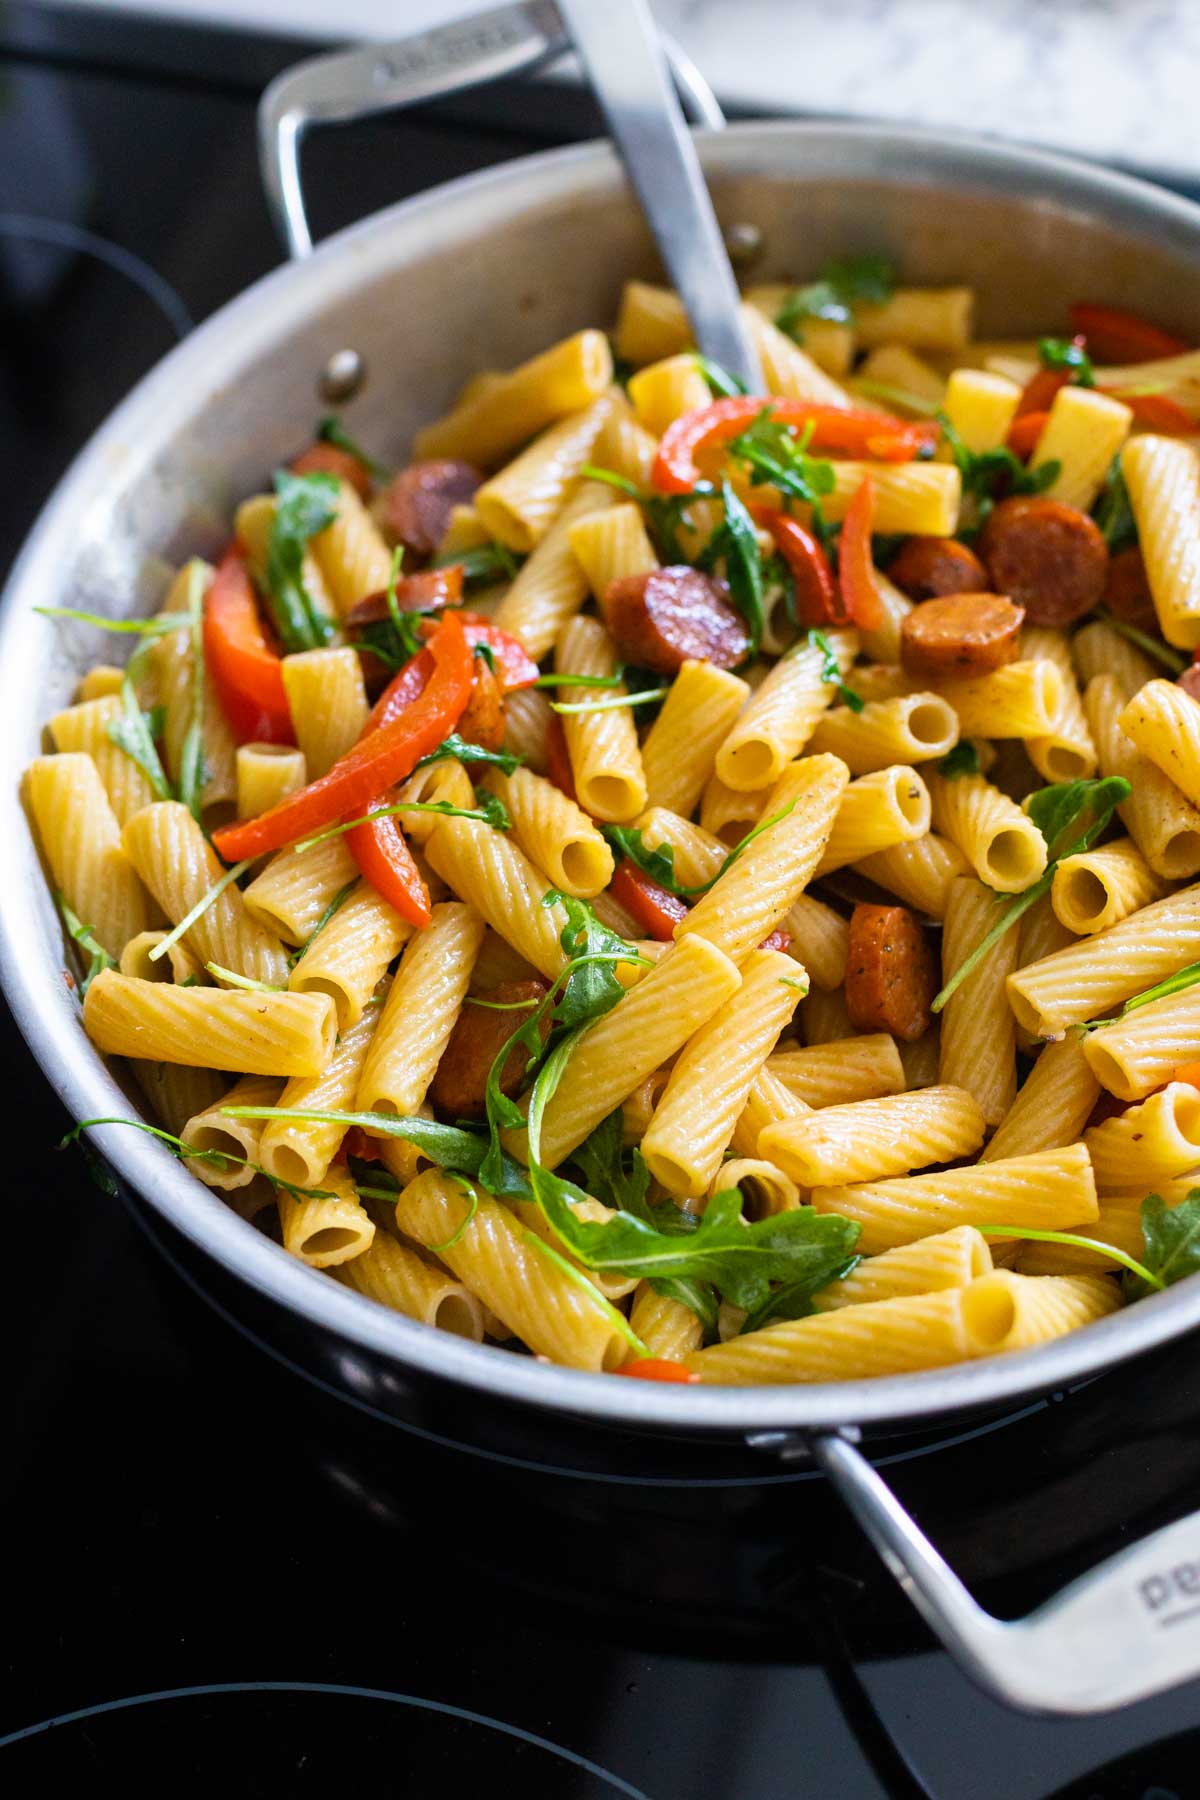 The skillet has the finished sausage and peppers pasta ready to serve.